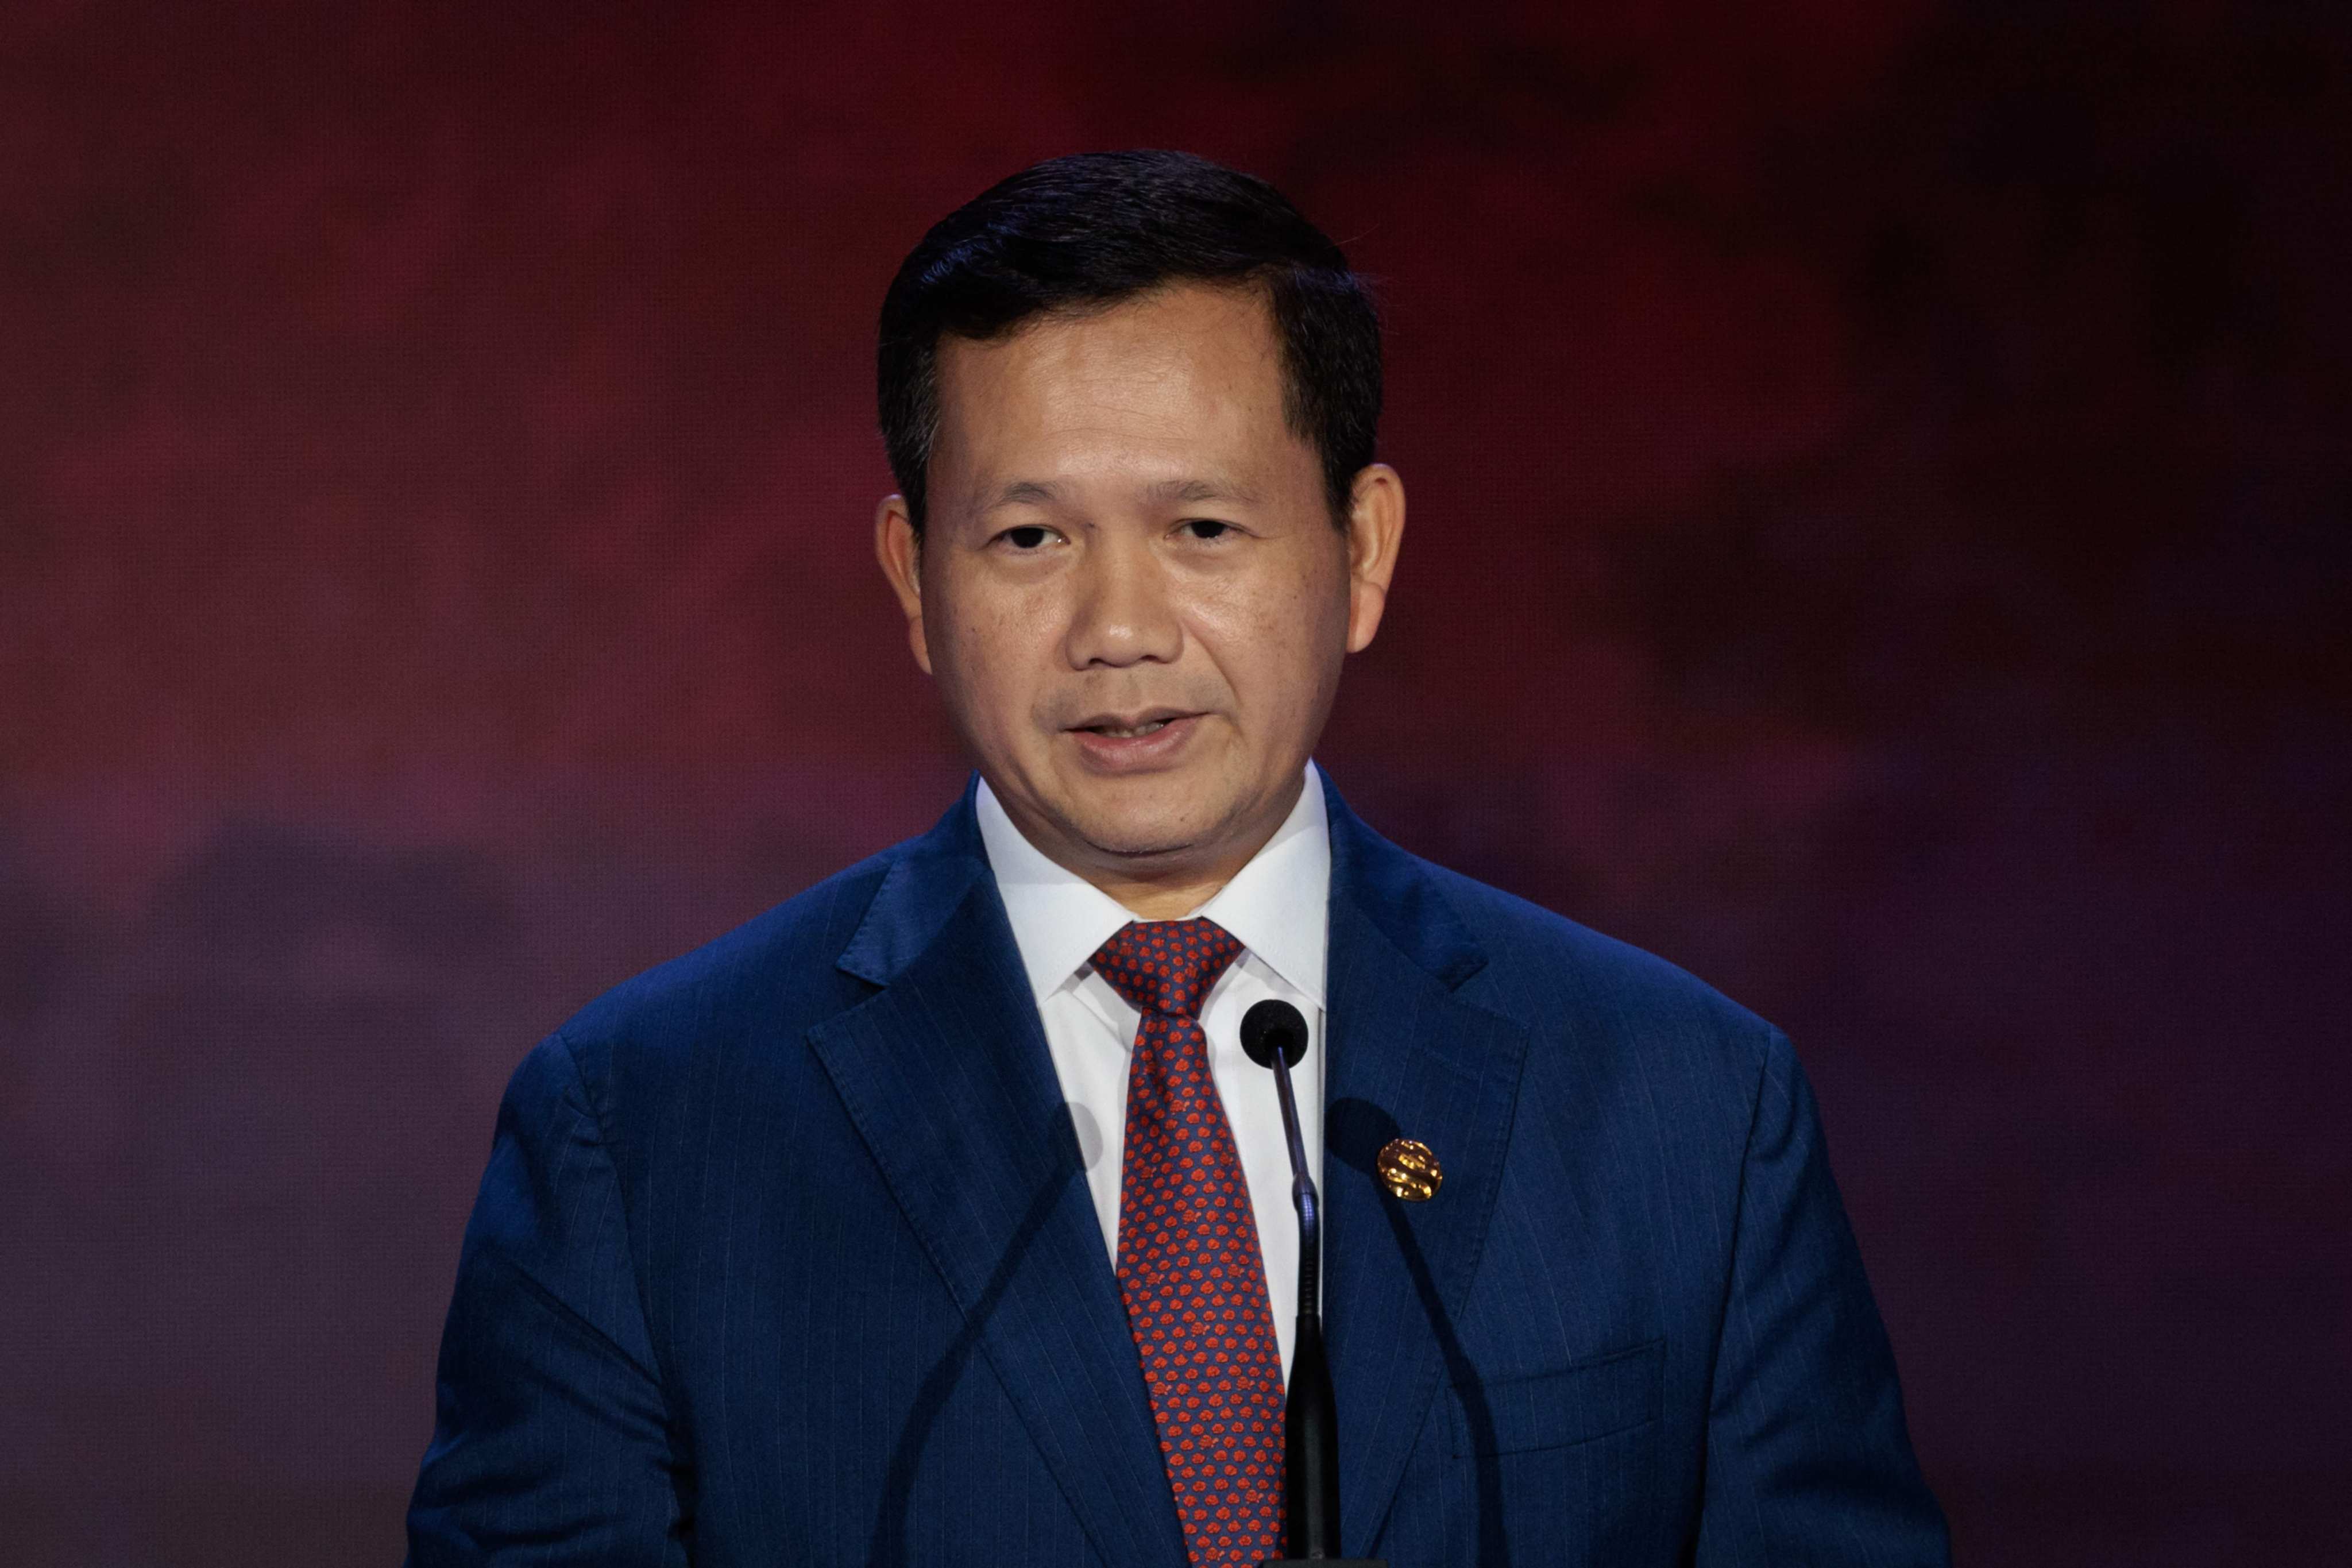 Cambodia’s Prime Minister Hun Manet will visit China from Thursday. He will meet Chinese President Xi Jinping on his first bilateral visit since taking office from his father Hun Sen in August. Photo: AFP